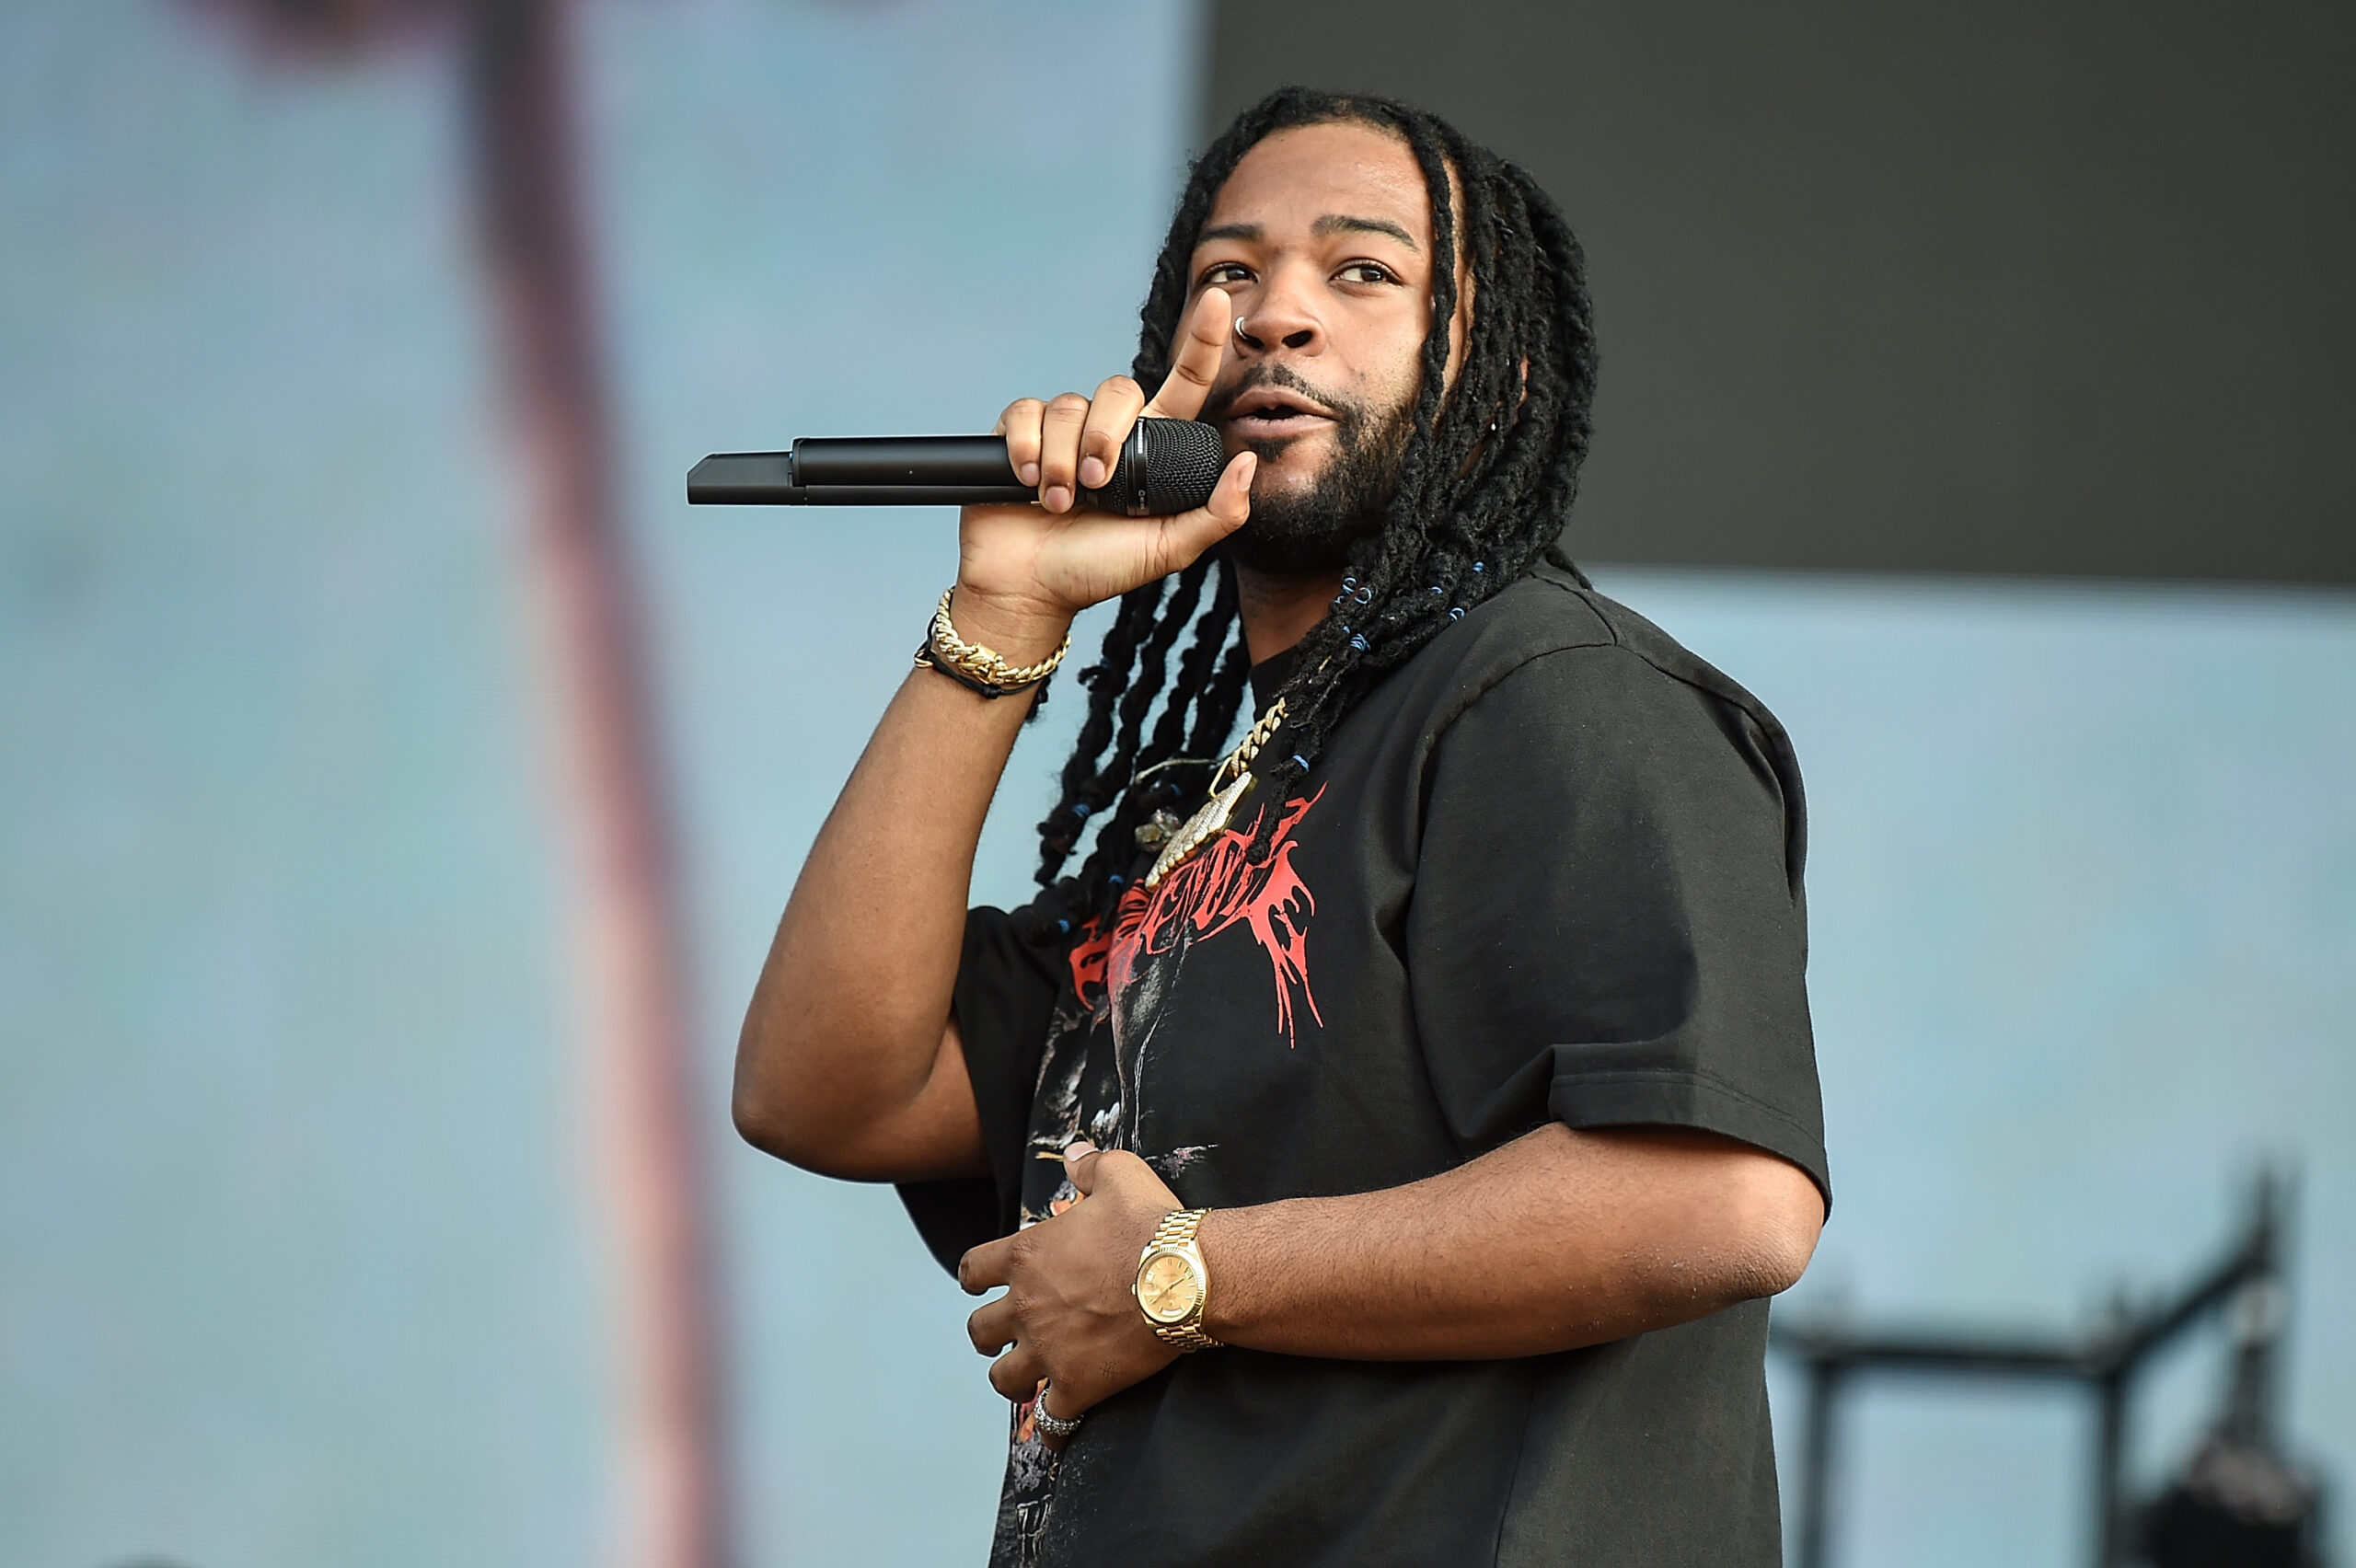 PartyNextDoor apologizes to Chris Brown, Jeremih and Bryson Tiller after being criticized for including his ex in their music video